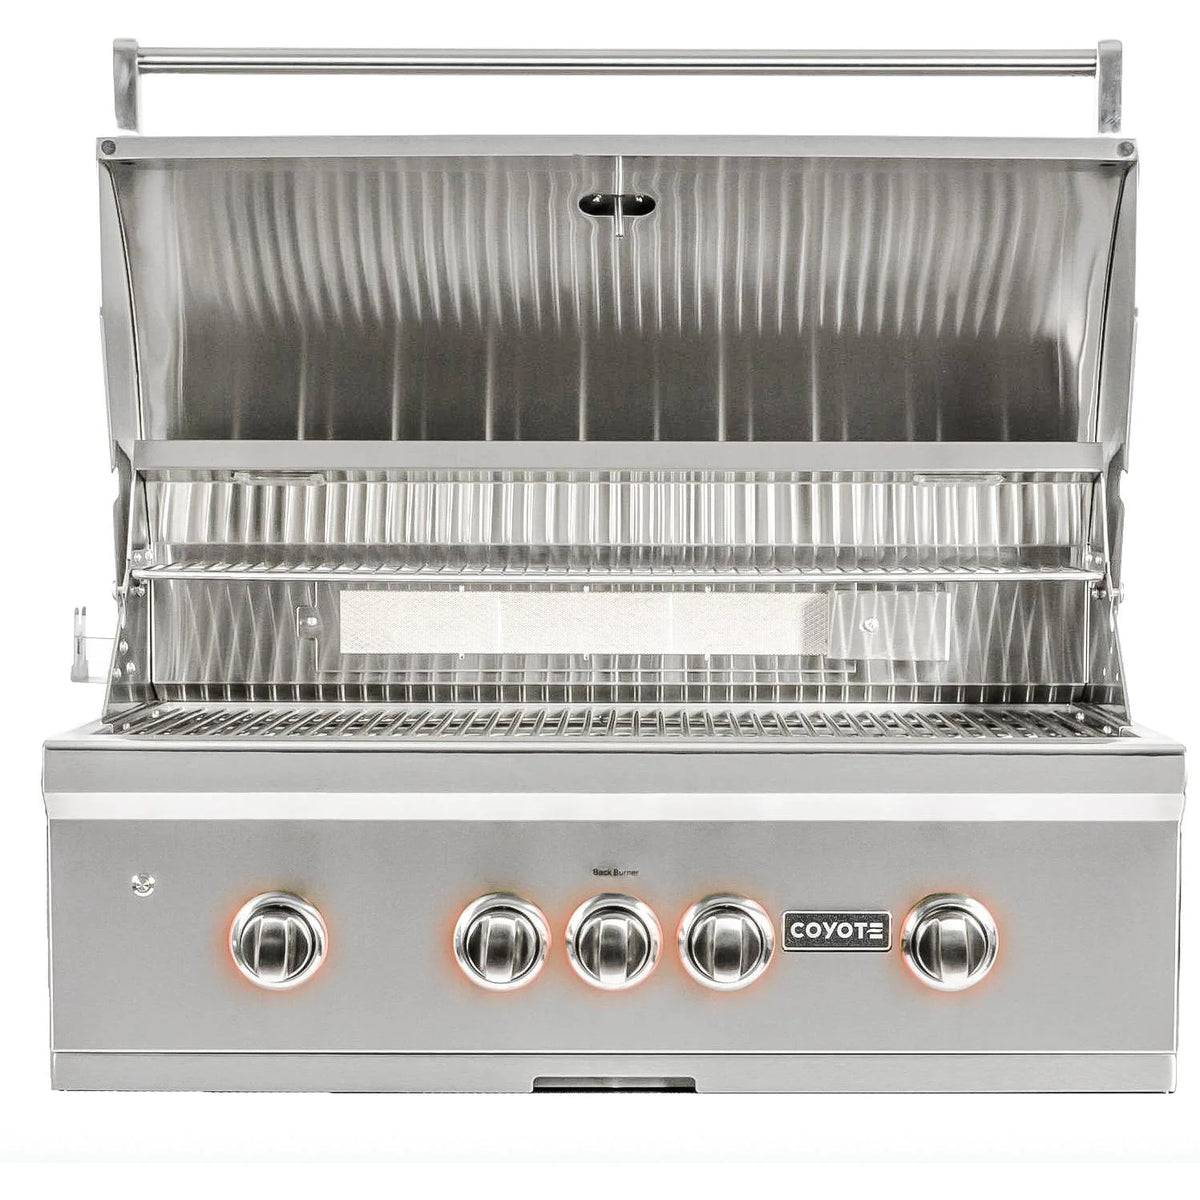 Coyote S-Series 36 Inch Built-In 4-Burner Grill with LED Lights and Rapidsear Infrared Burner Open Hood Cover